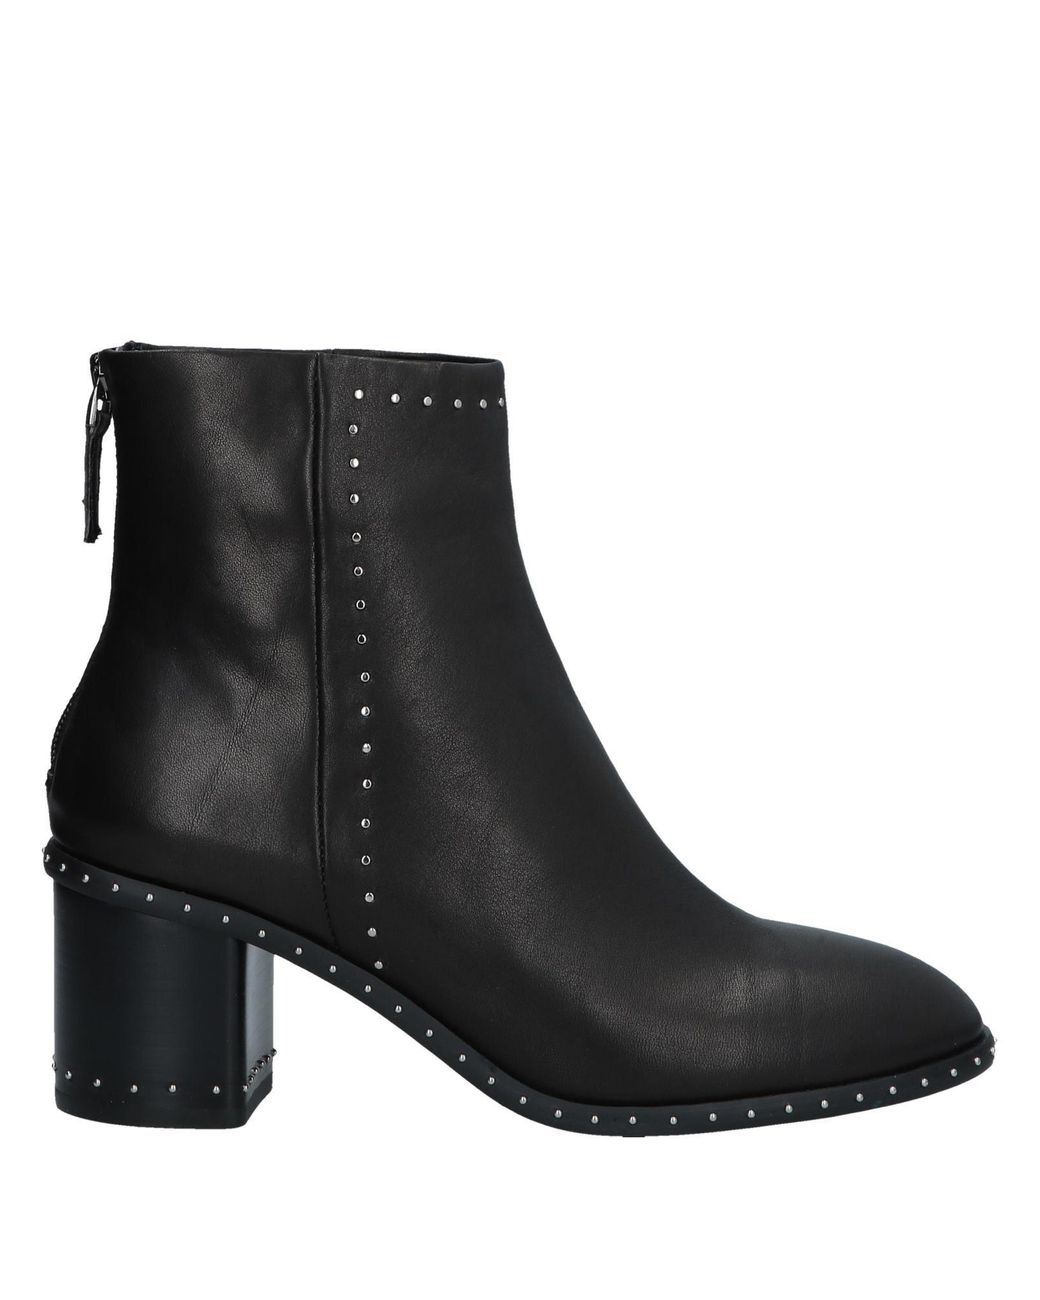 Lola Cruz Ankle Boots in Black - Lyst